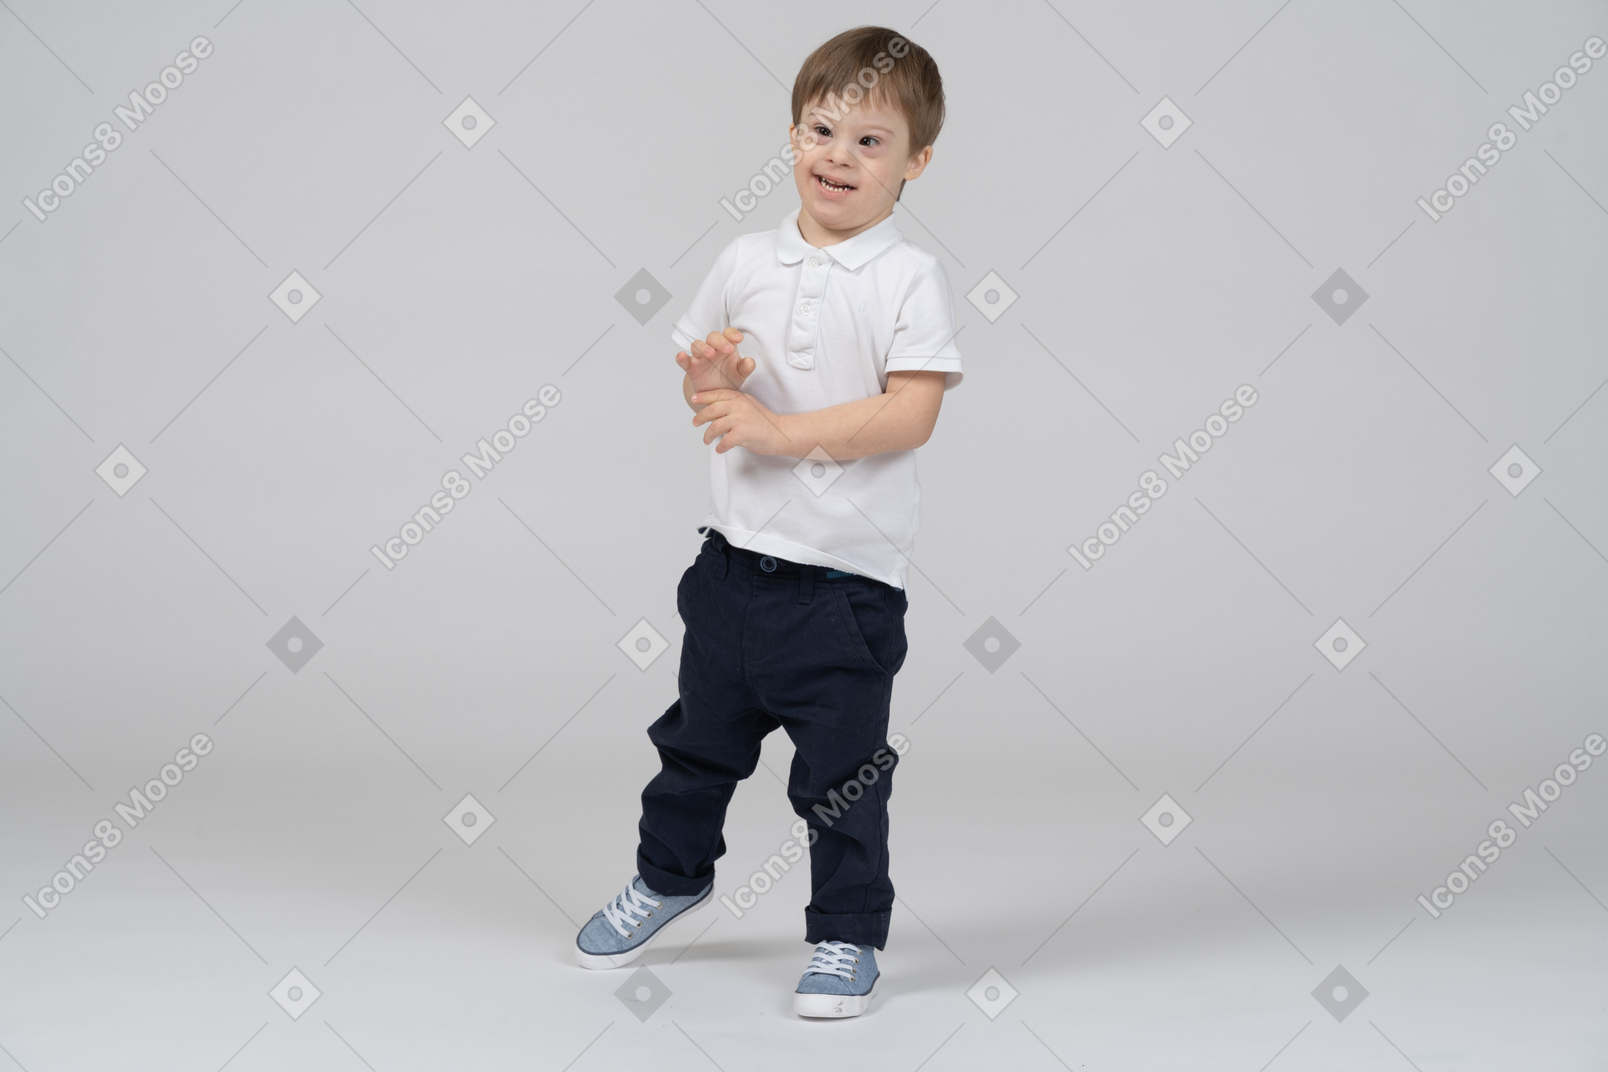 Front view of a cheerful little boy